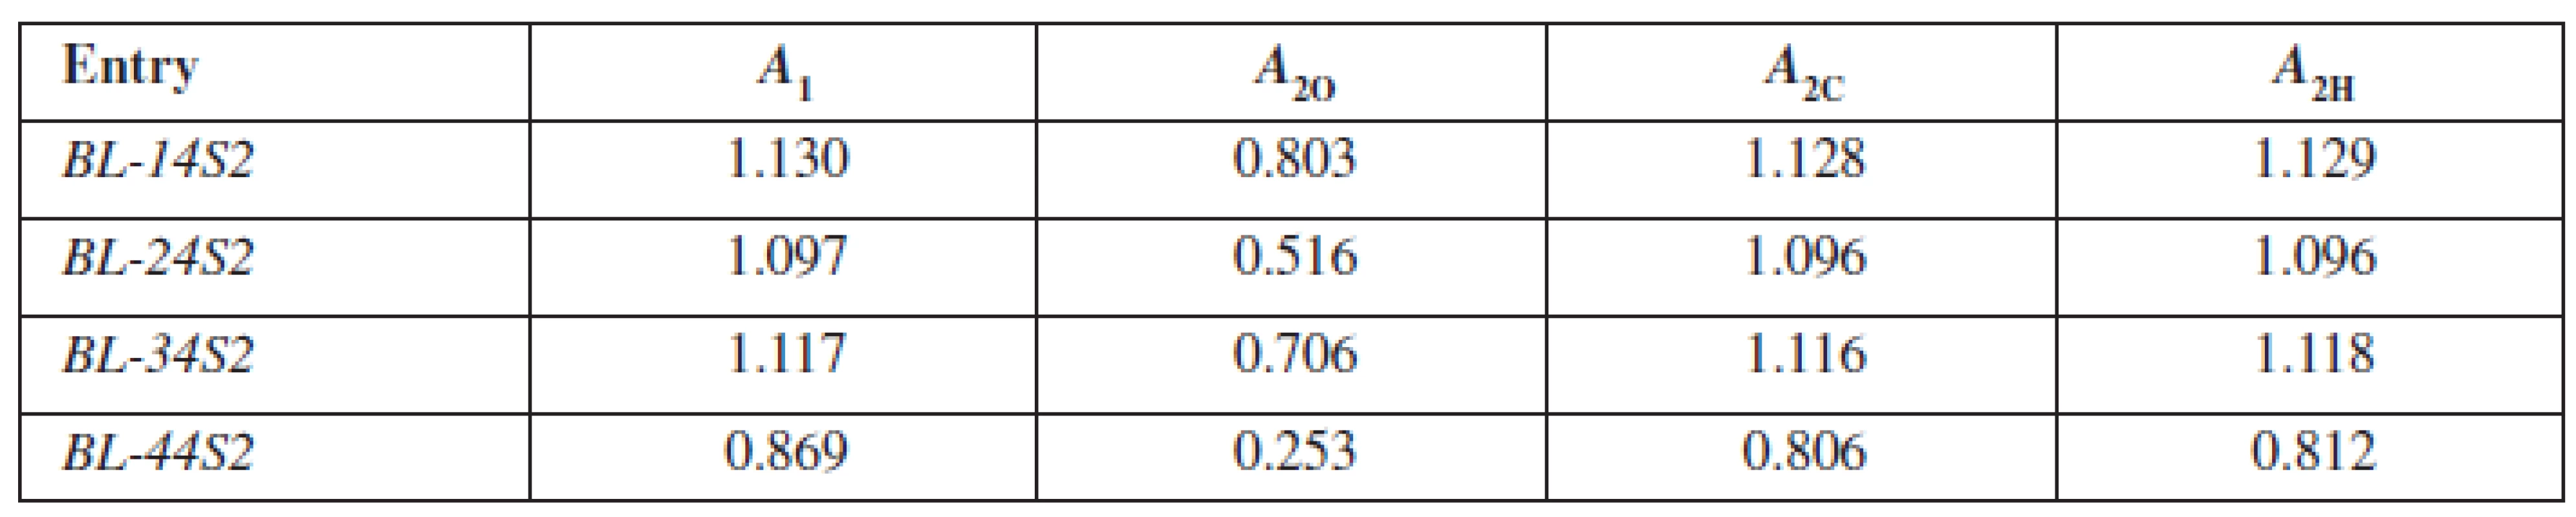 Values of absorbances for calculation log P<sub>O</sub>, log P<sub>C</sub>, log P<sub>H</sub> for studied compounds BL-14S2-BL-44S2